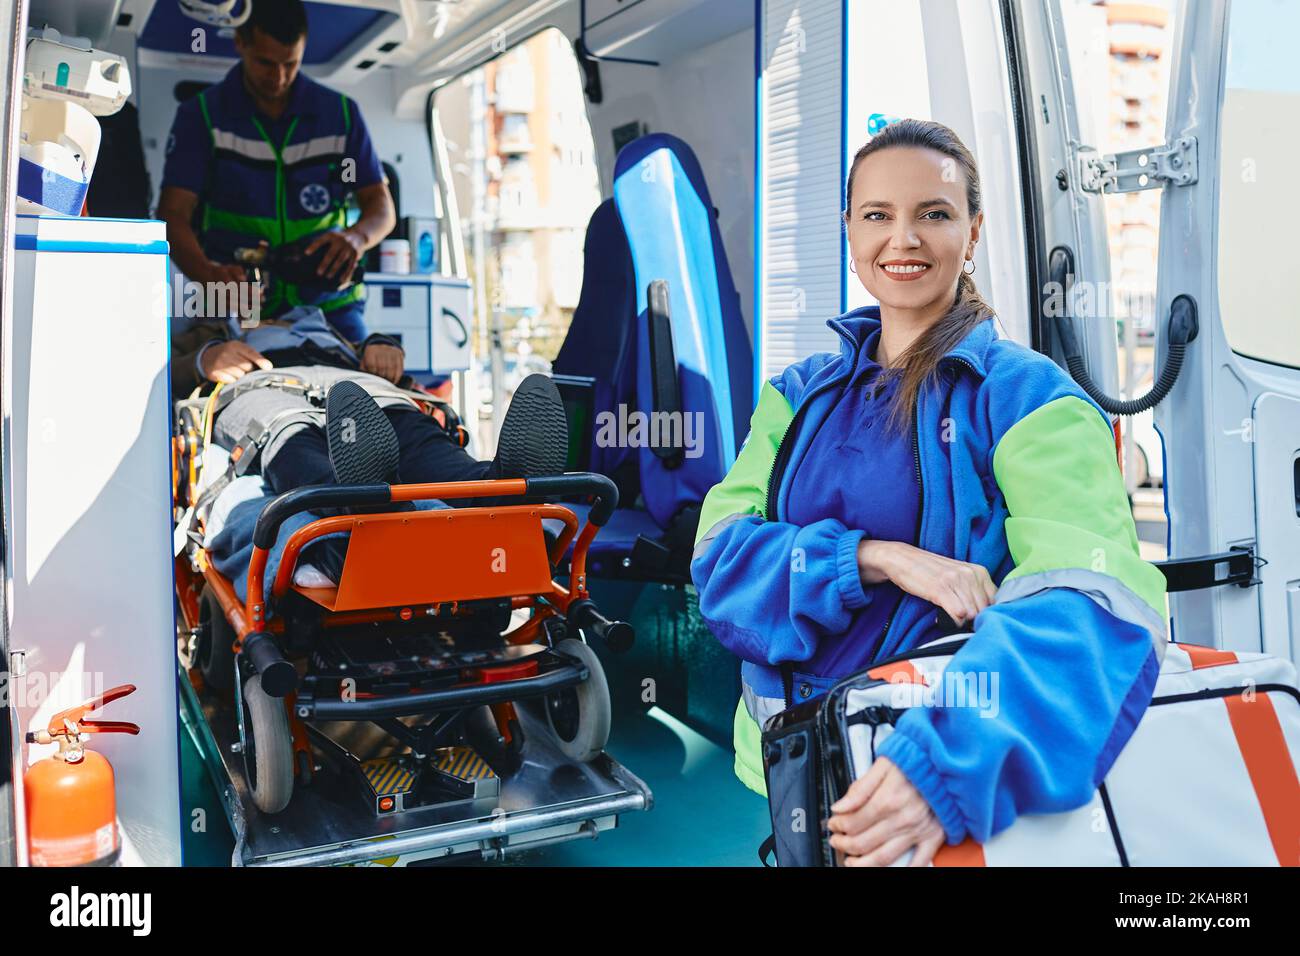 Portrait of female paramedic standing near ambulance vehicle with aid kit bag and looking at camera. Ambulance medical technician Stock Photo